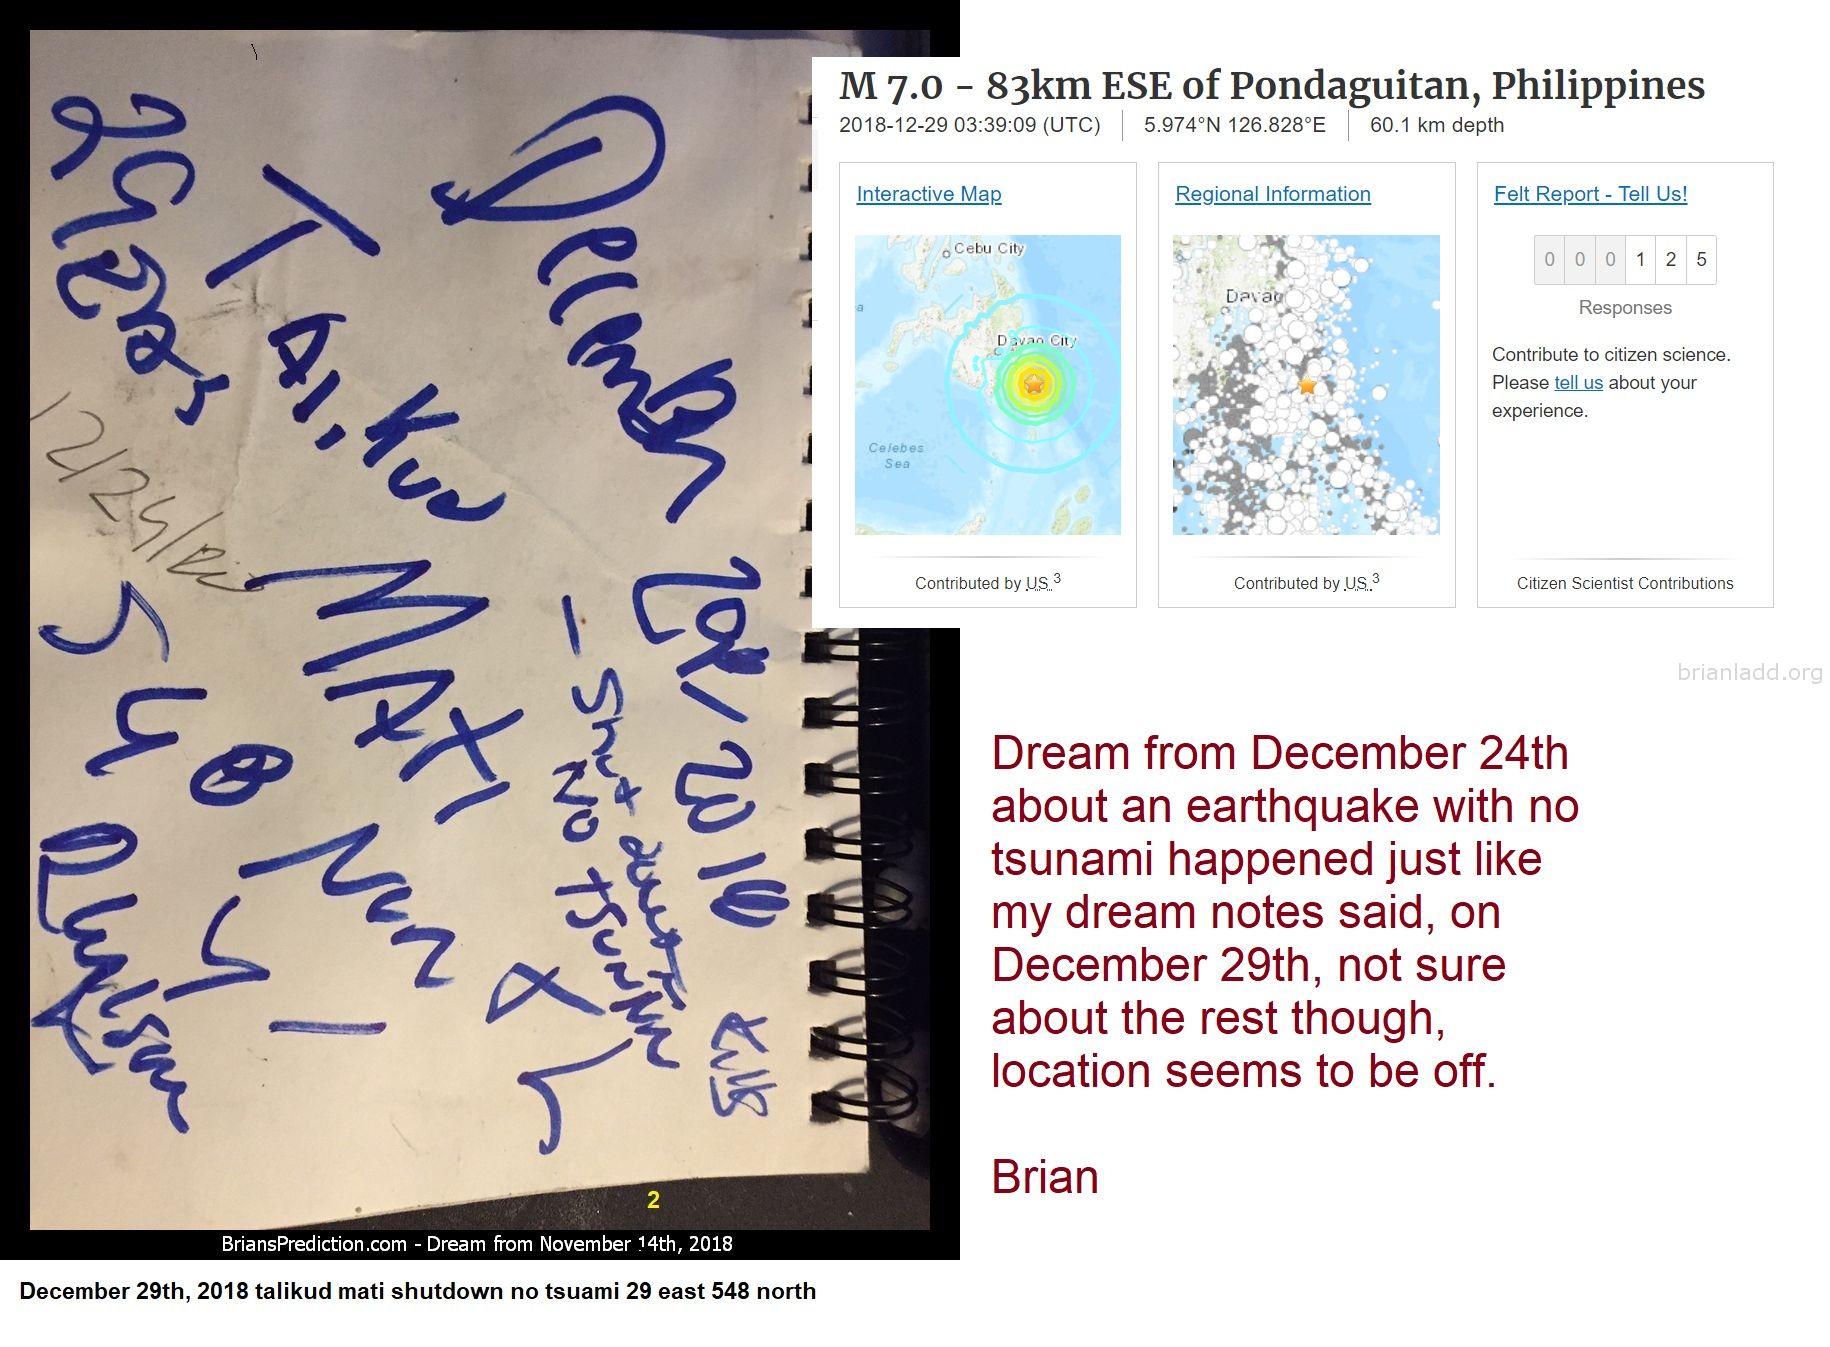 Philippines Earthquake Dream 11501 24 December 2018 5 - Dream From December 24th About An Earthquake With No Tsunami Hap...
Dream From December 24th About An Earthquake With No Tsunami Happened Just Like My Dream Notes Said, On December 29th, Not Sure About The Rest Though, Location Seems To Be Off.  Brian  M 7.0 - 83km Ese Of Pondaguitan, Philippines  2018-12-29 03:39:09 (UTC)5.974Â°N 126.828â°E60.1 Km Depth  Earthquake Shakes Southern Philippines  A 7.0 Magnitude Earthquake Was Recorded Off The Coast Of The Southern Philippines, According To The Us Geological Survey.Source: Cnn
